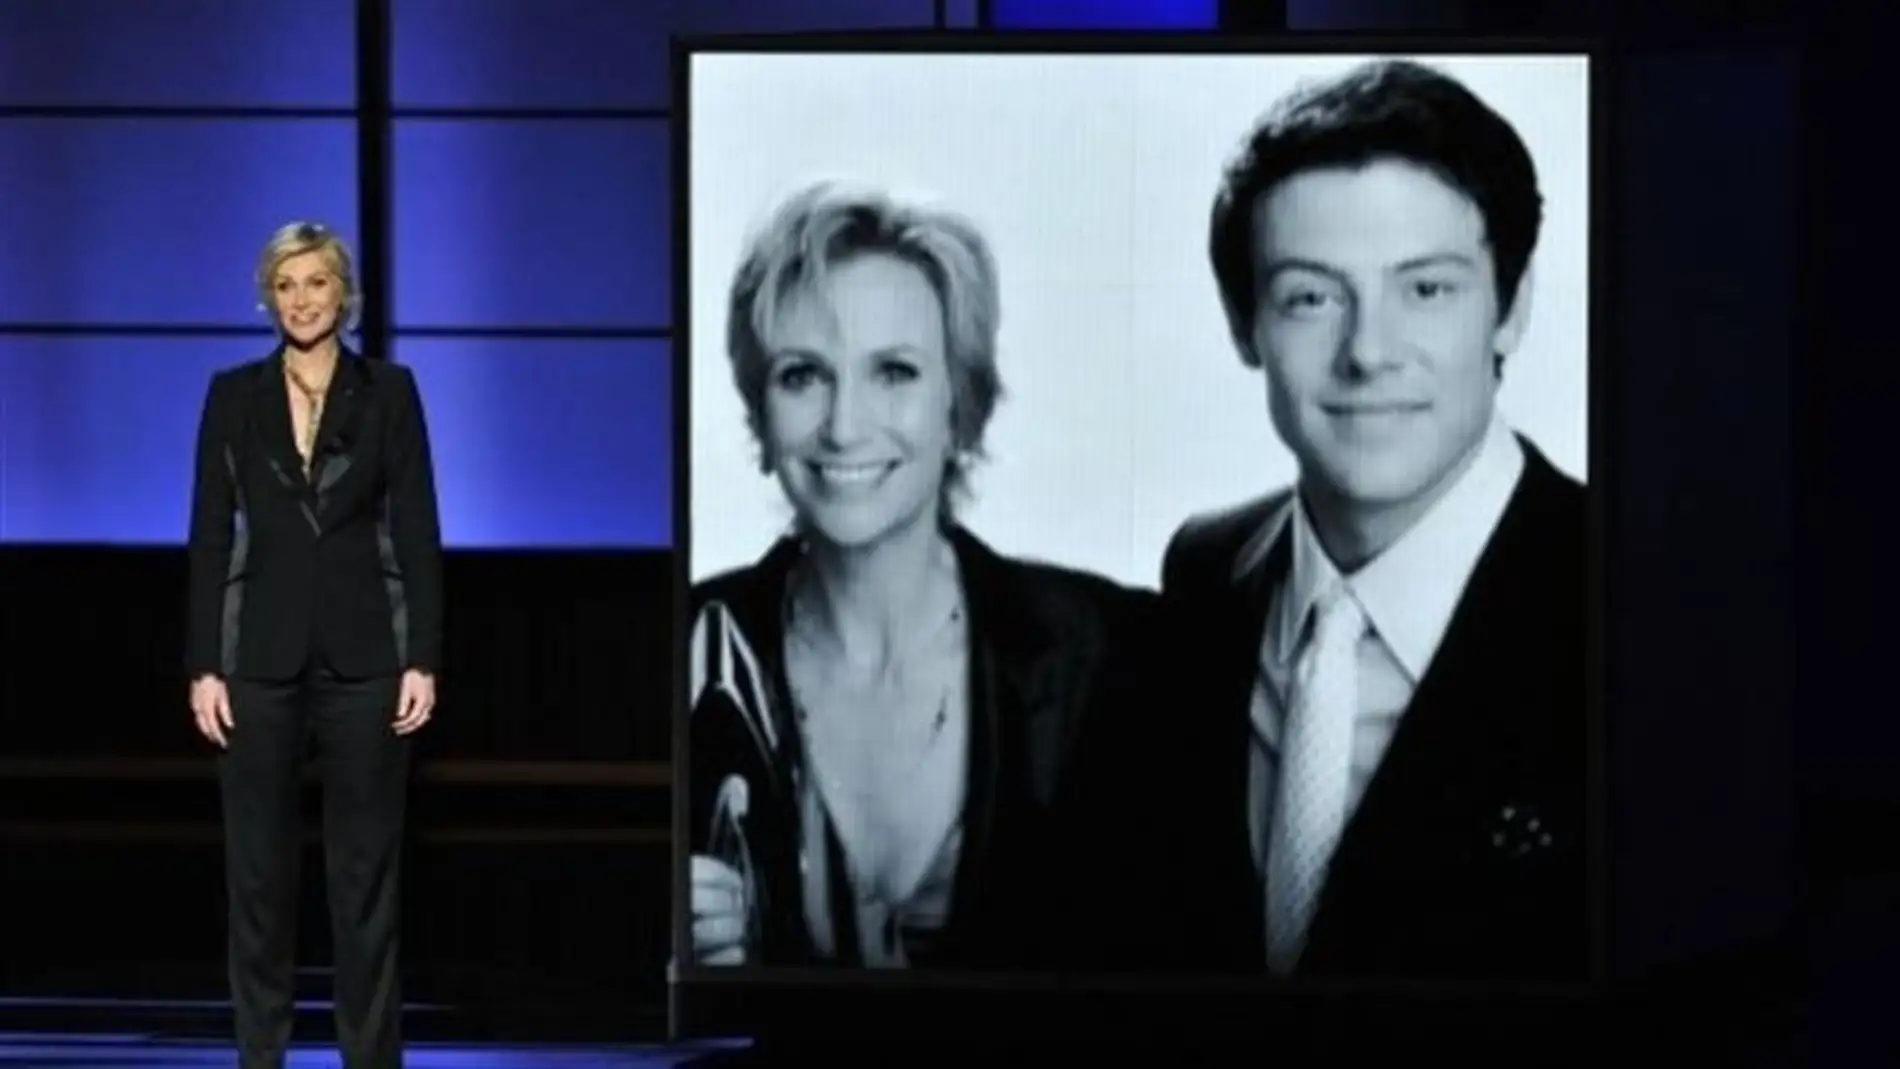 Jane Lynch (Glee) rinde tributo a Cory Monteith en los Emmy  